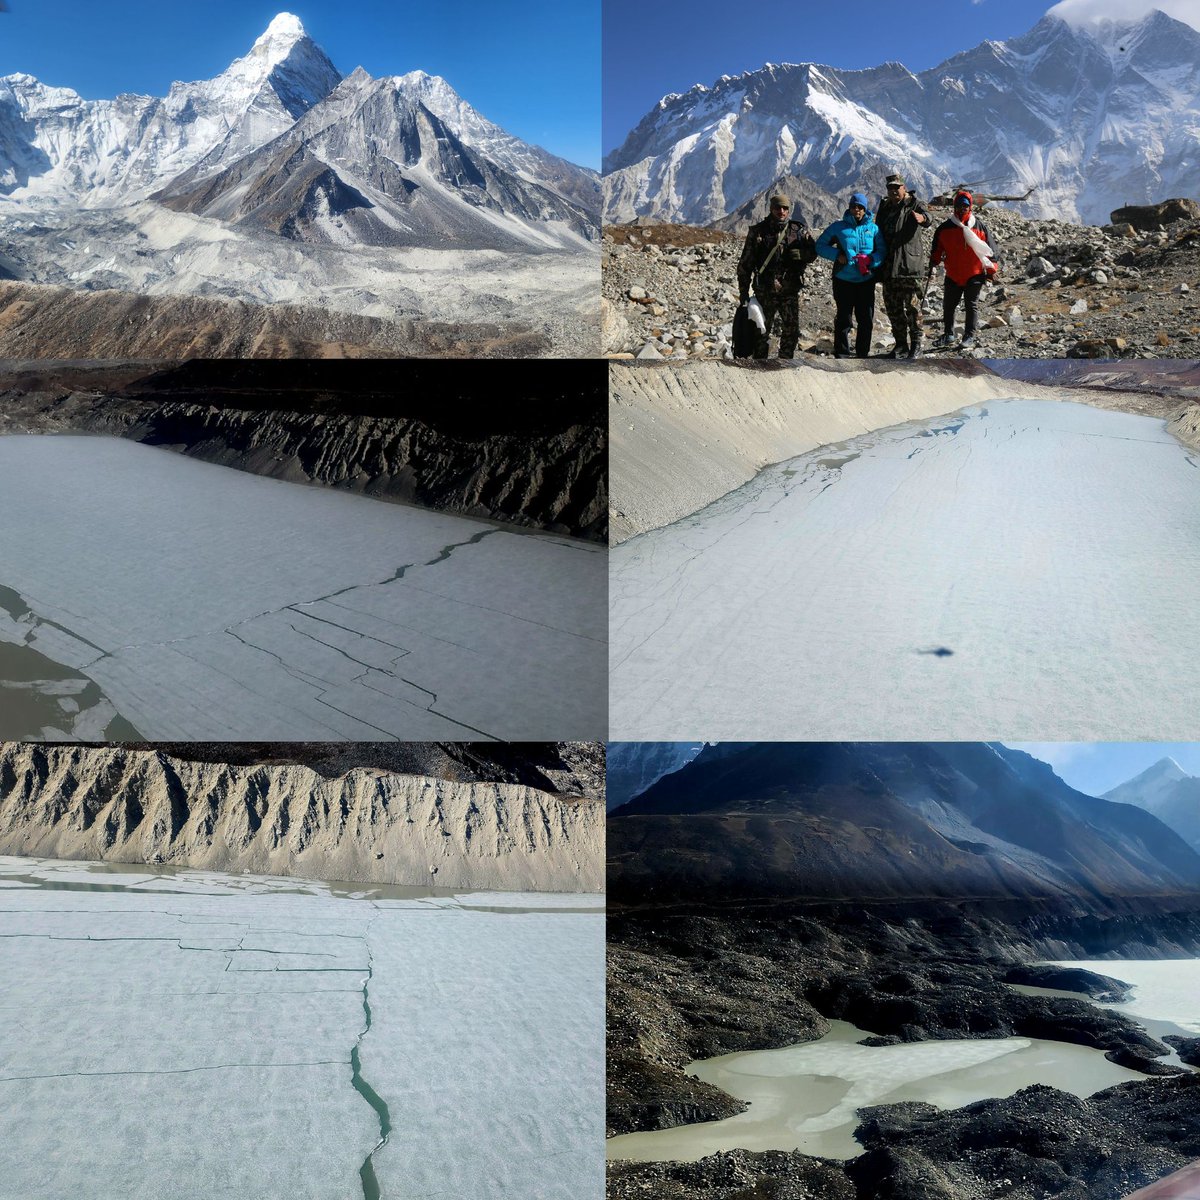 Hovering over glaciers at #Imja lake #Nepal Where @UNDPNepal @DHM_FloodEWS @NepaliArmyHQ carried out Lake lowering at 5000+m With ASG @kanniwignaraja @amritrai555 #Everest #Glaciers #GLOF @theGEF